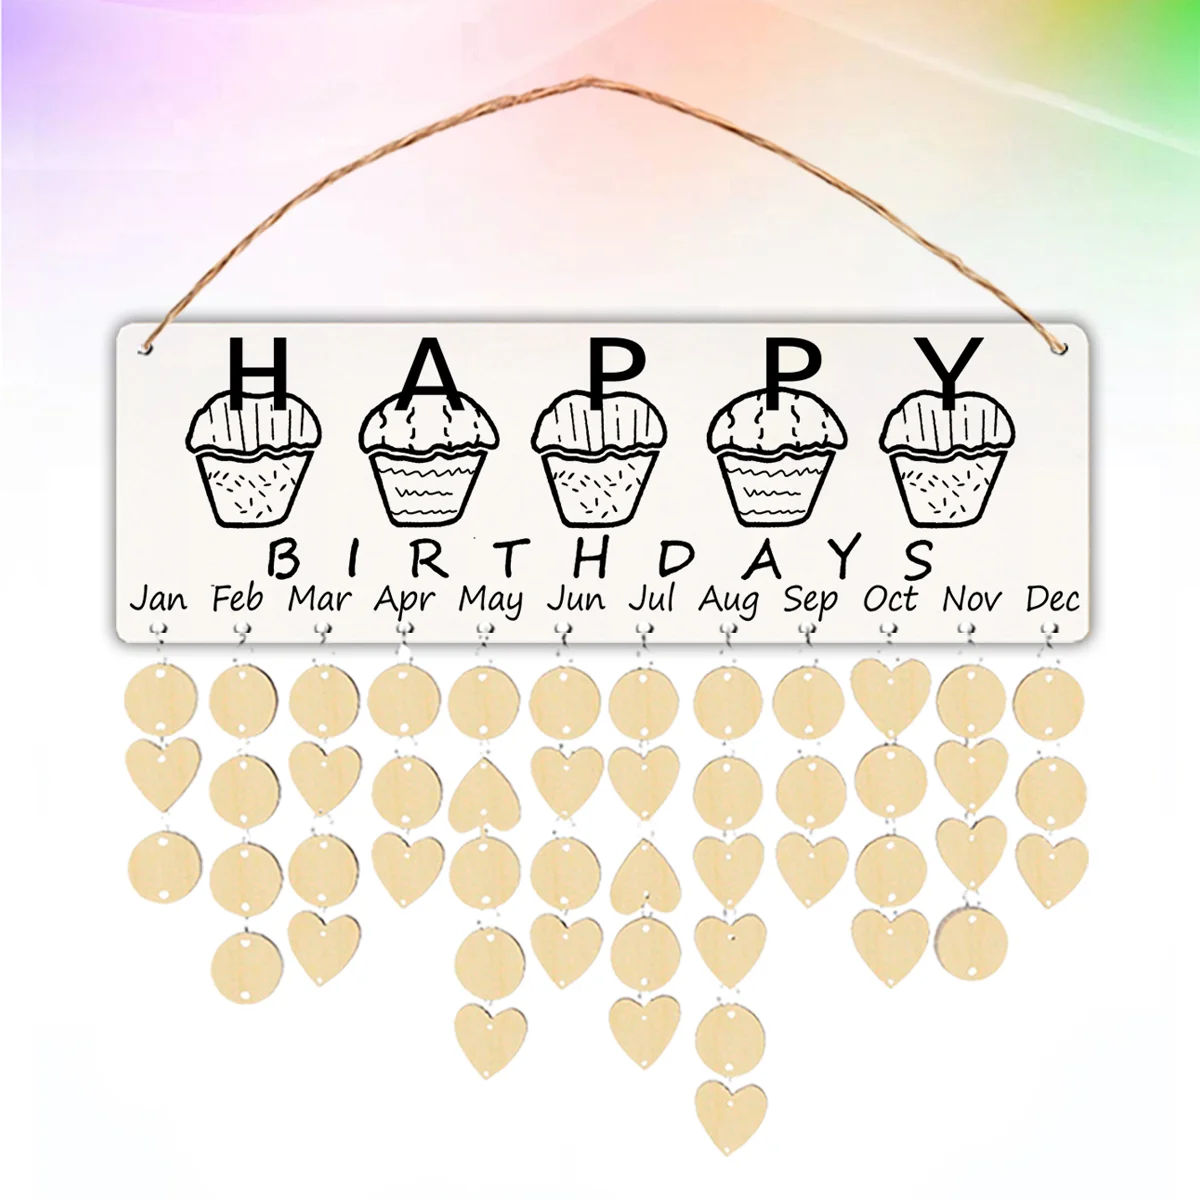 Wooden Birthday Reminder Board DIY Dates Reminder Sign Rope Hanging Events Anniversary Celebration Calendar Wall Plaque with 10 pieces plastic merchandise sign clip with erasable board rotatable pop clip holder stand price tag holder display